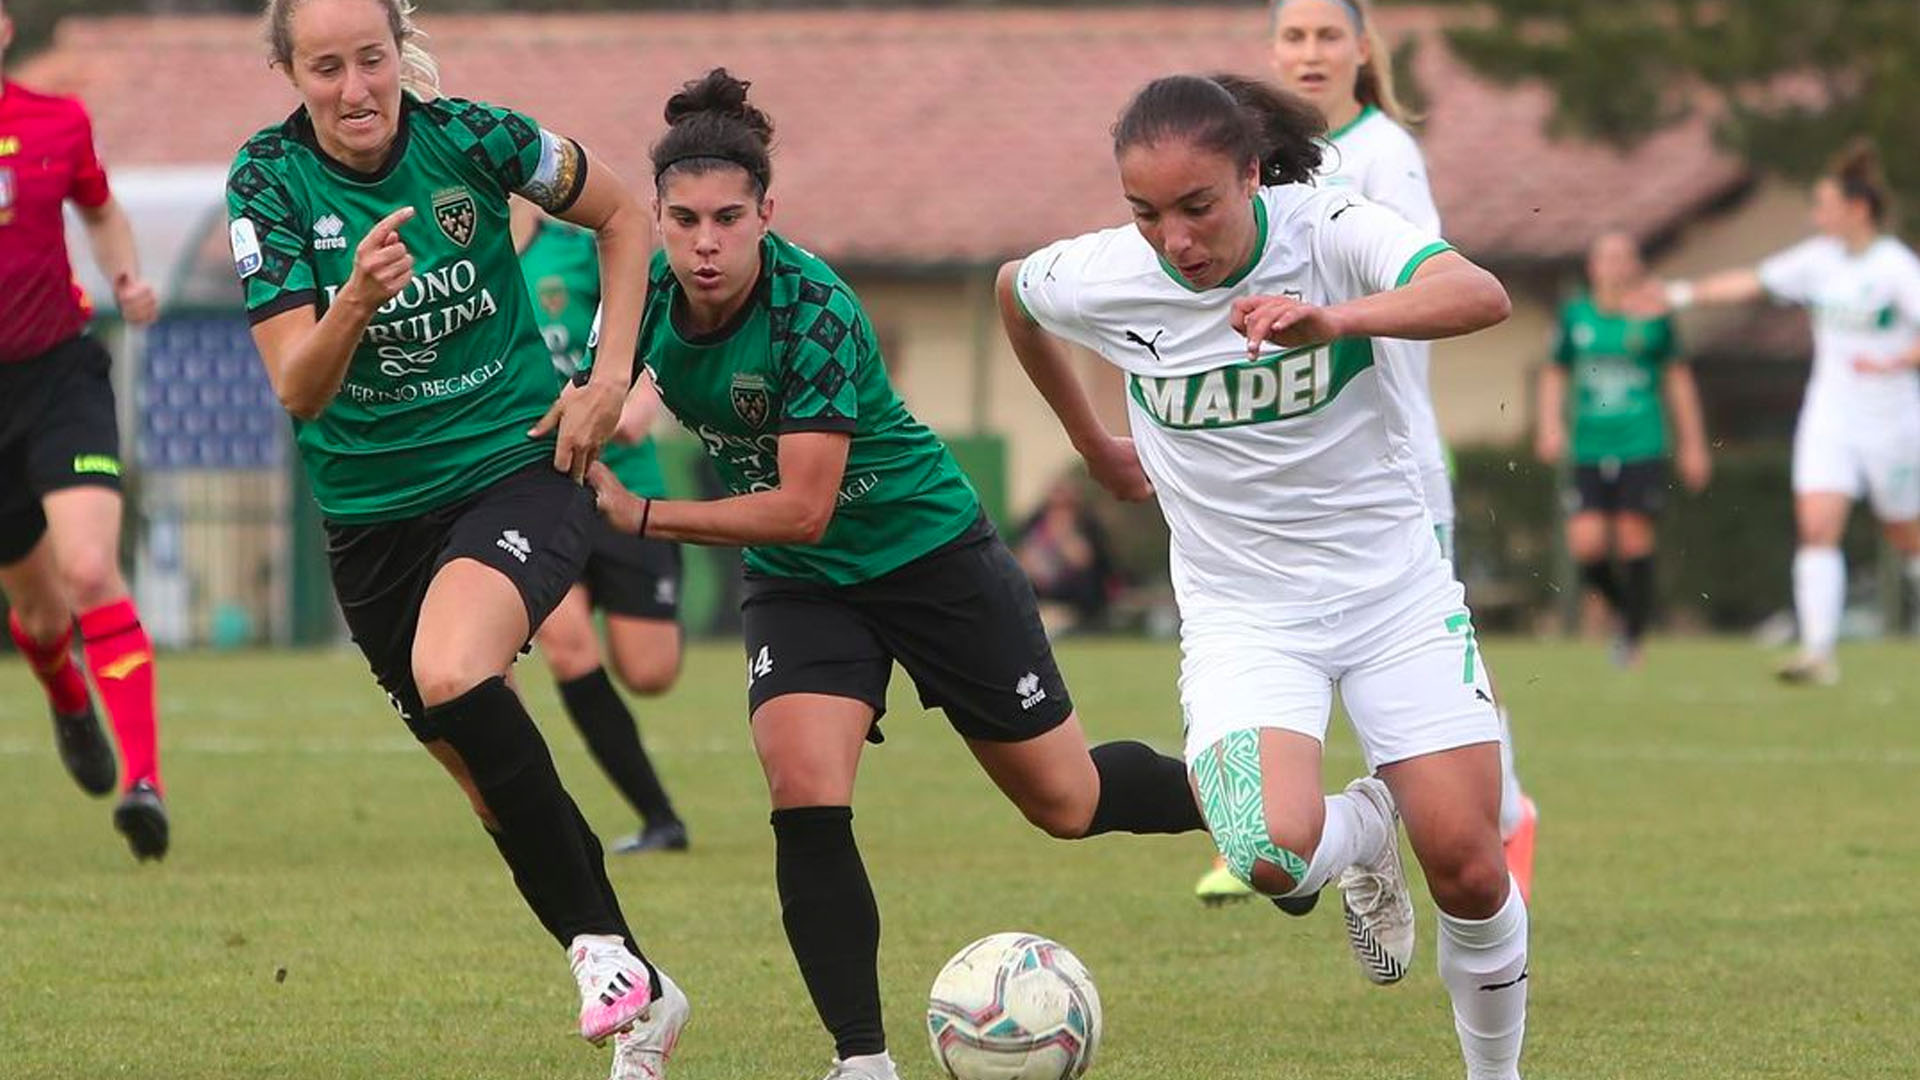 Haley Bugeja hits the ten goal mark in Italian Serie A with her second goal against Verona